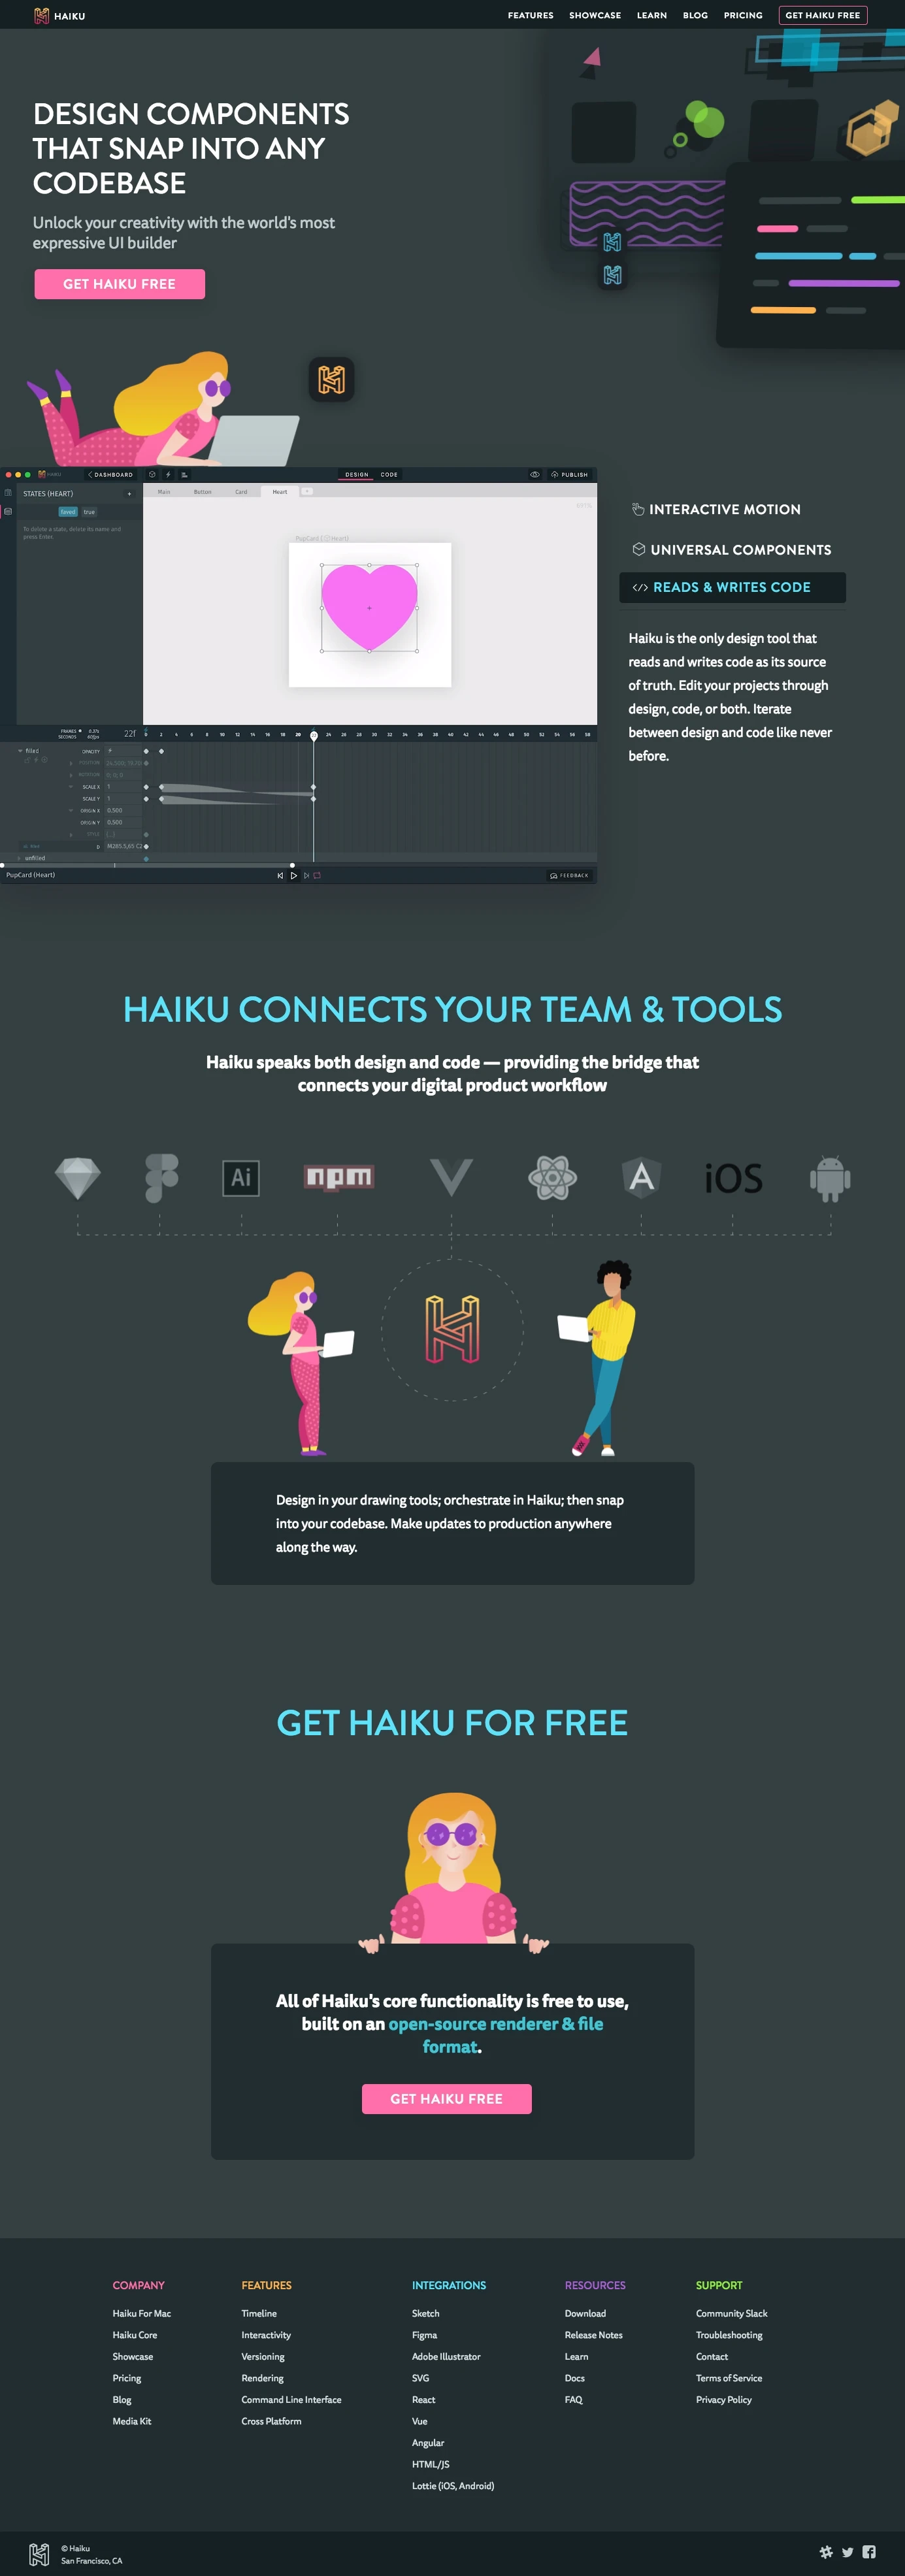 Haiku Landing Page Example: Where designing is building. Create dynamic, cross-platform UIs using design tools, code, or both. Works with any iOS, Android, or Web codebase.